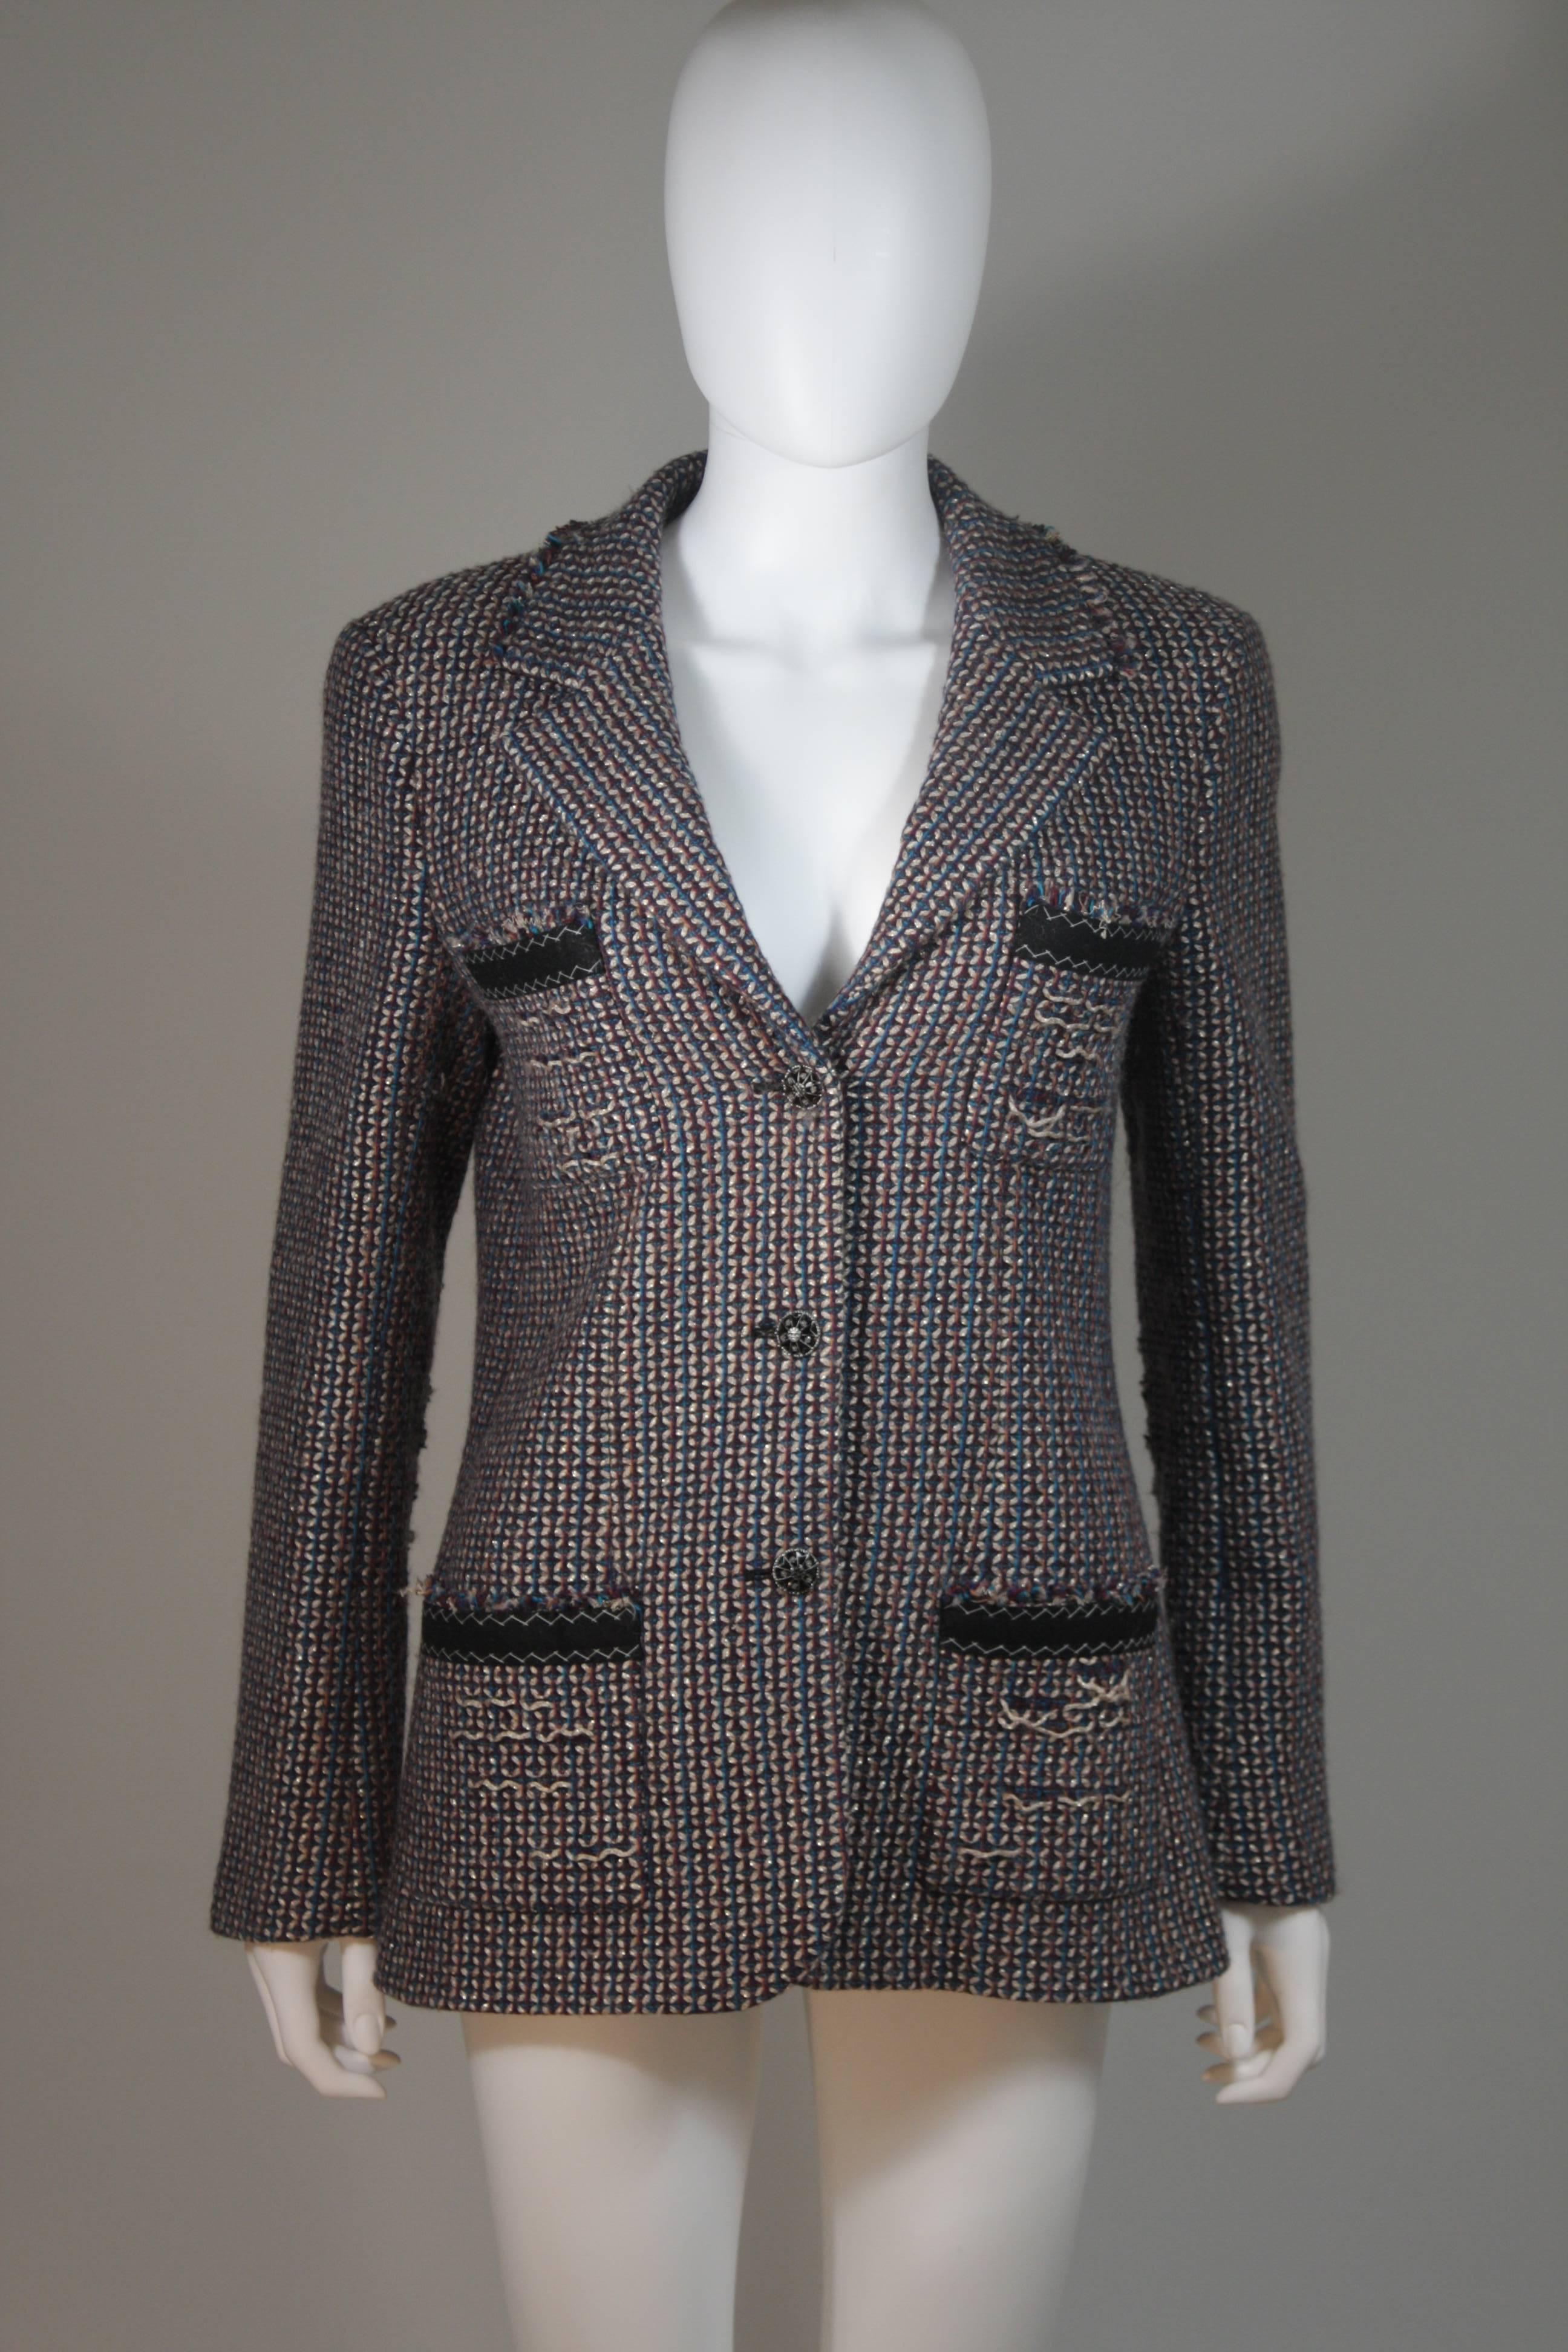 CHANEL Gold Metallic Tweed with Brown and Burgundy Skirt Suit Size 40 3